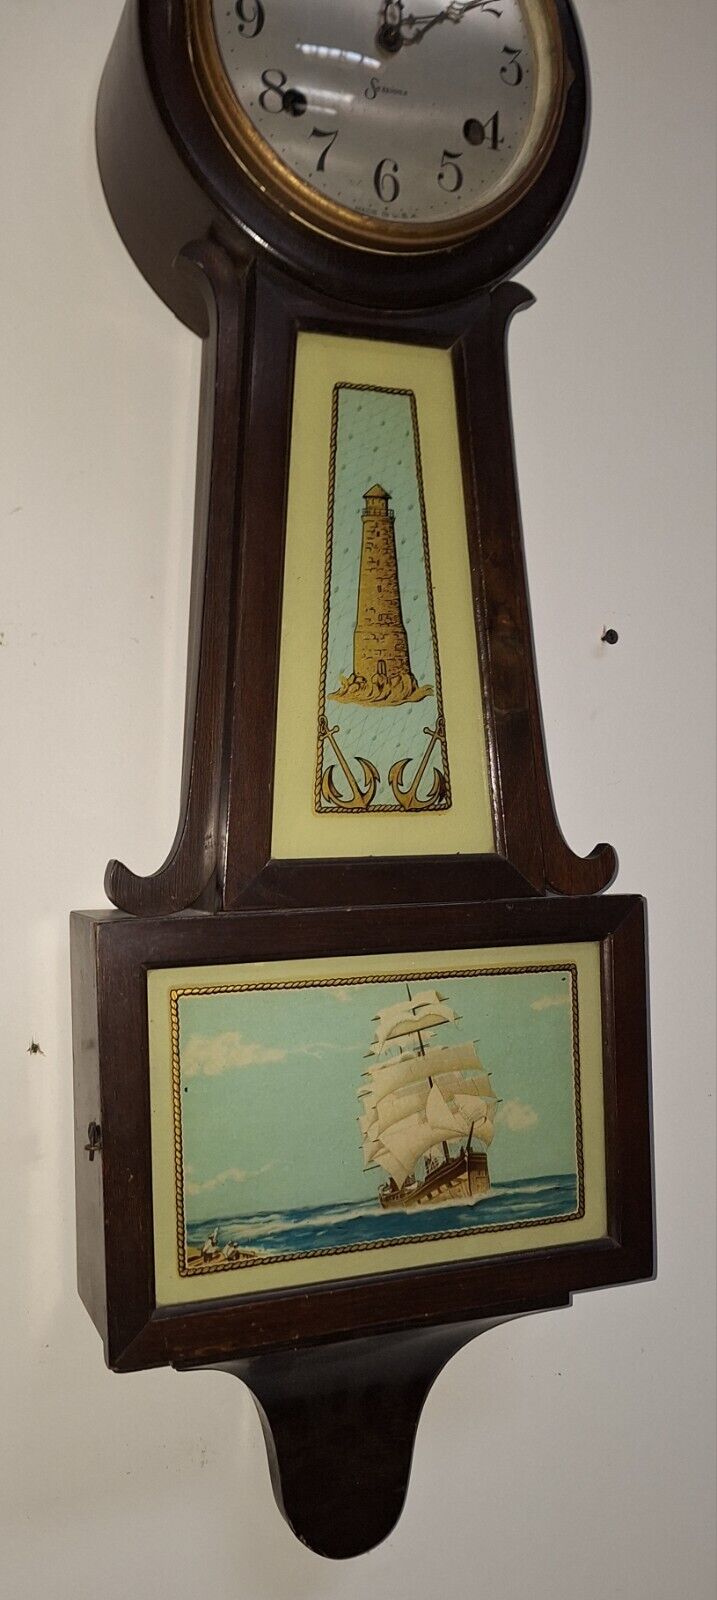 Antique Sessions Lighthouse & Ship 8 Day Banjo Wall Chime Clock Parts Repair 